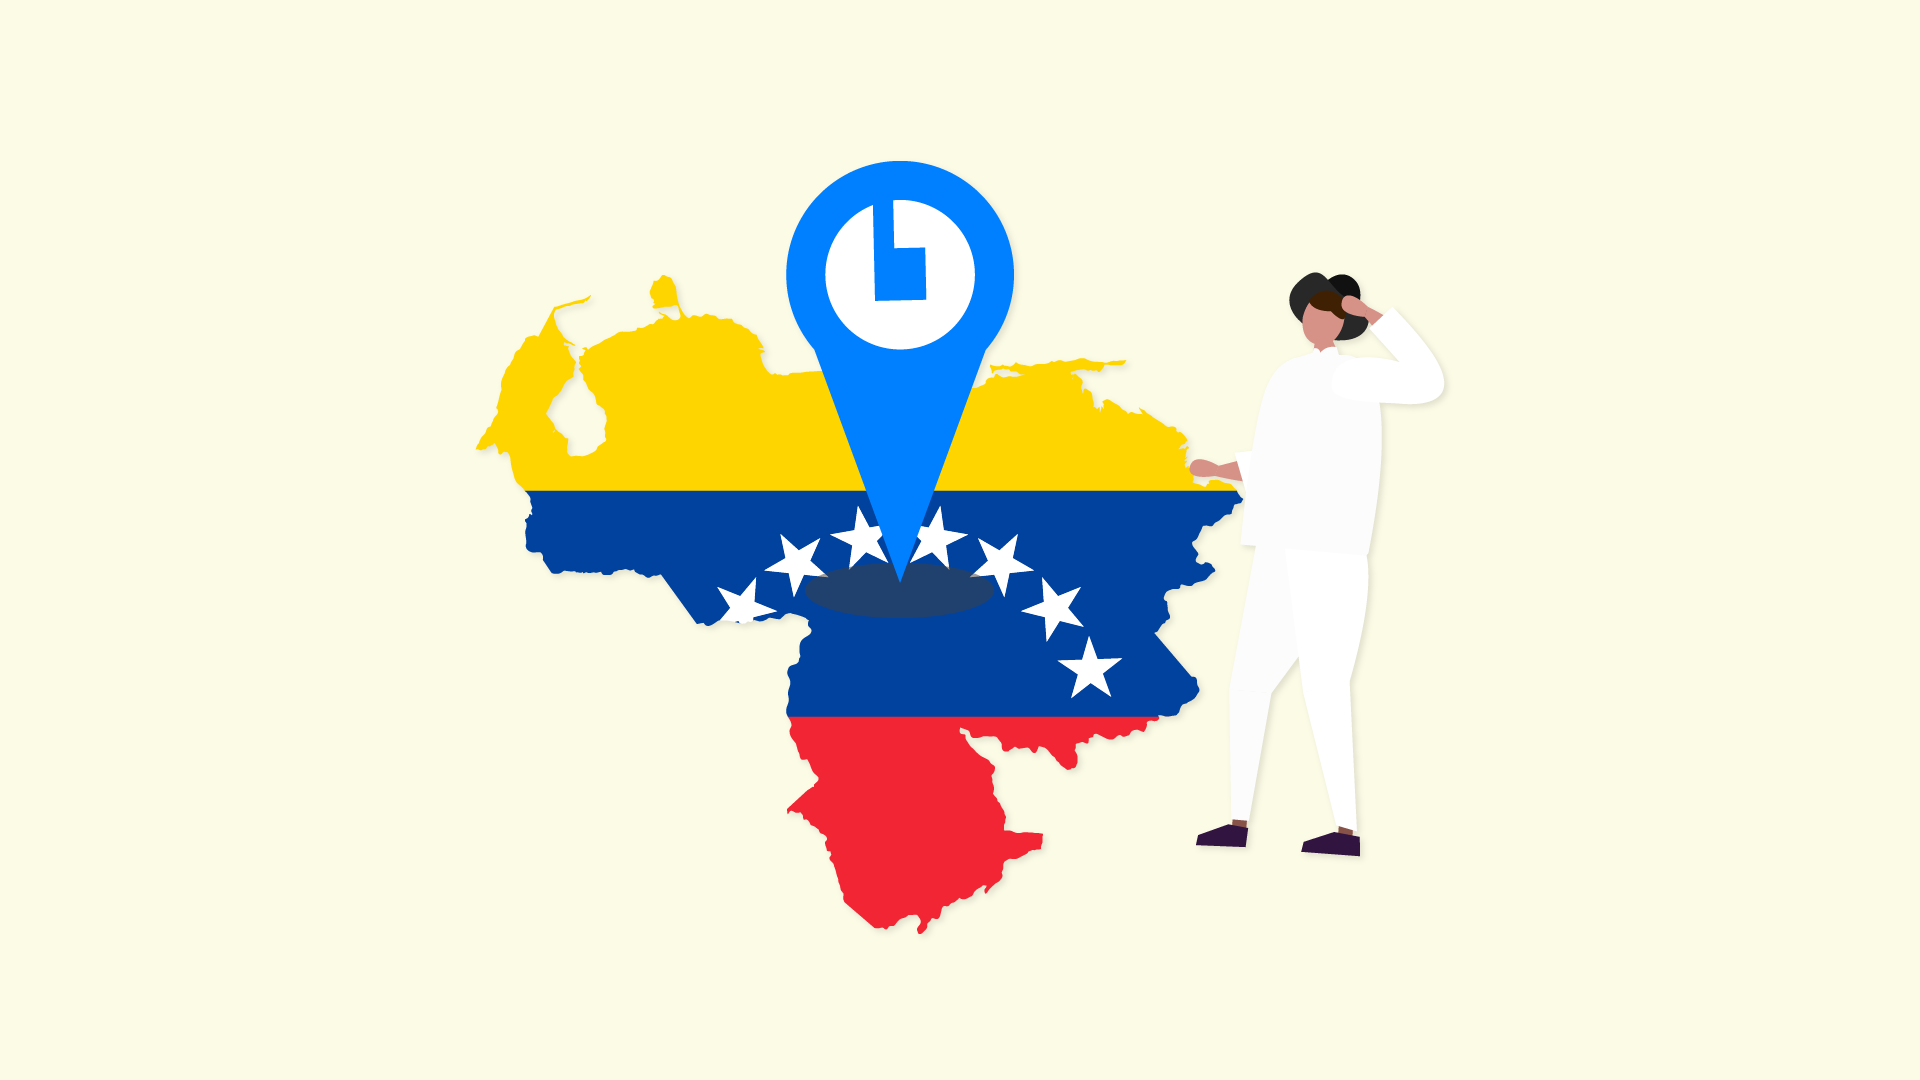 CoinCola - Yes! We're launching in Venezuela. Why?